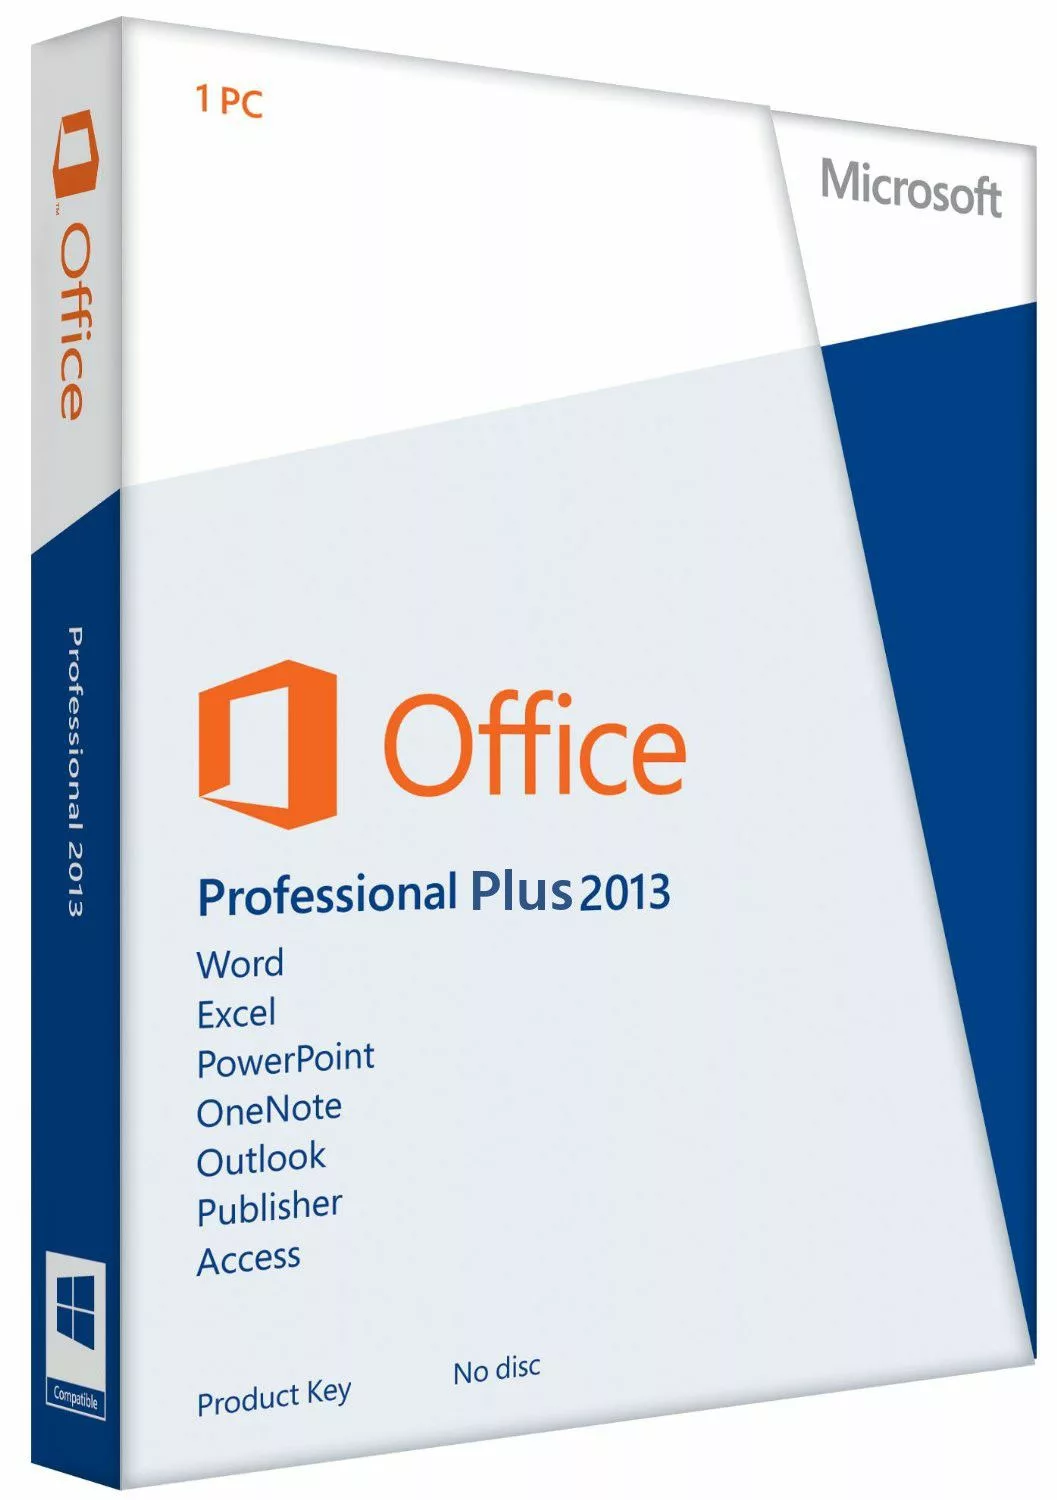 Download Microsoft Office 2013 Full Version Free download